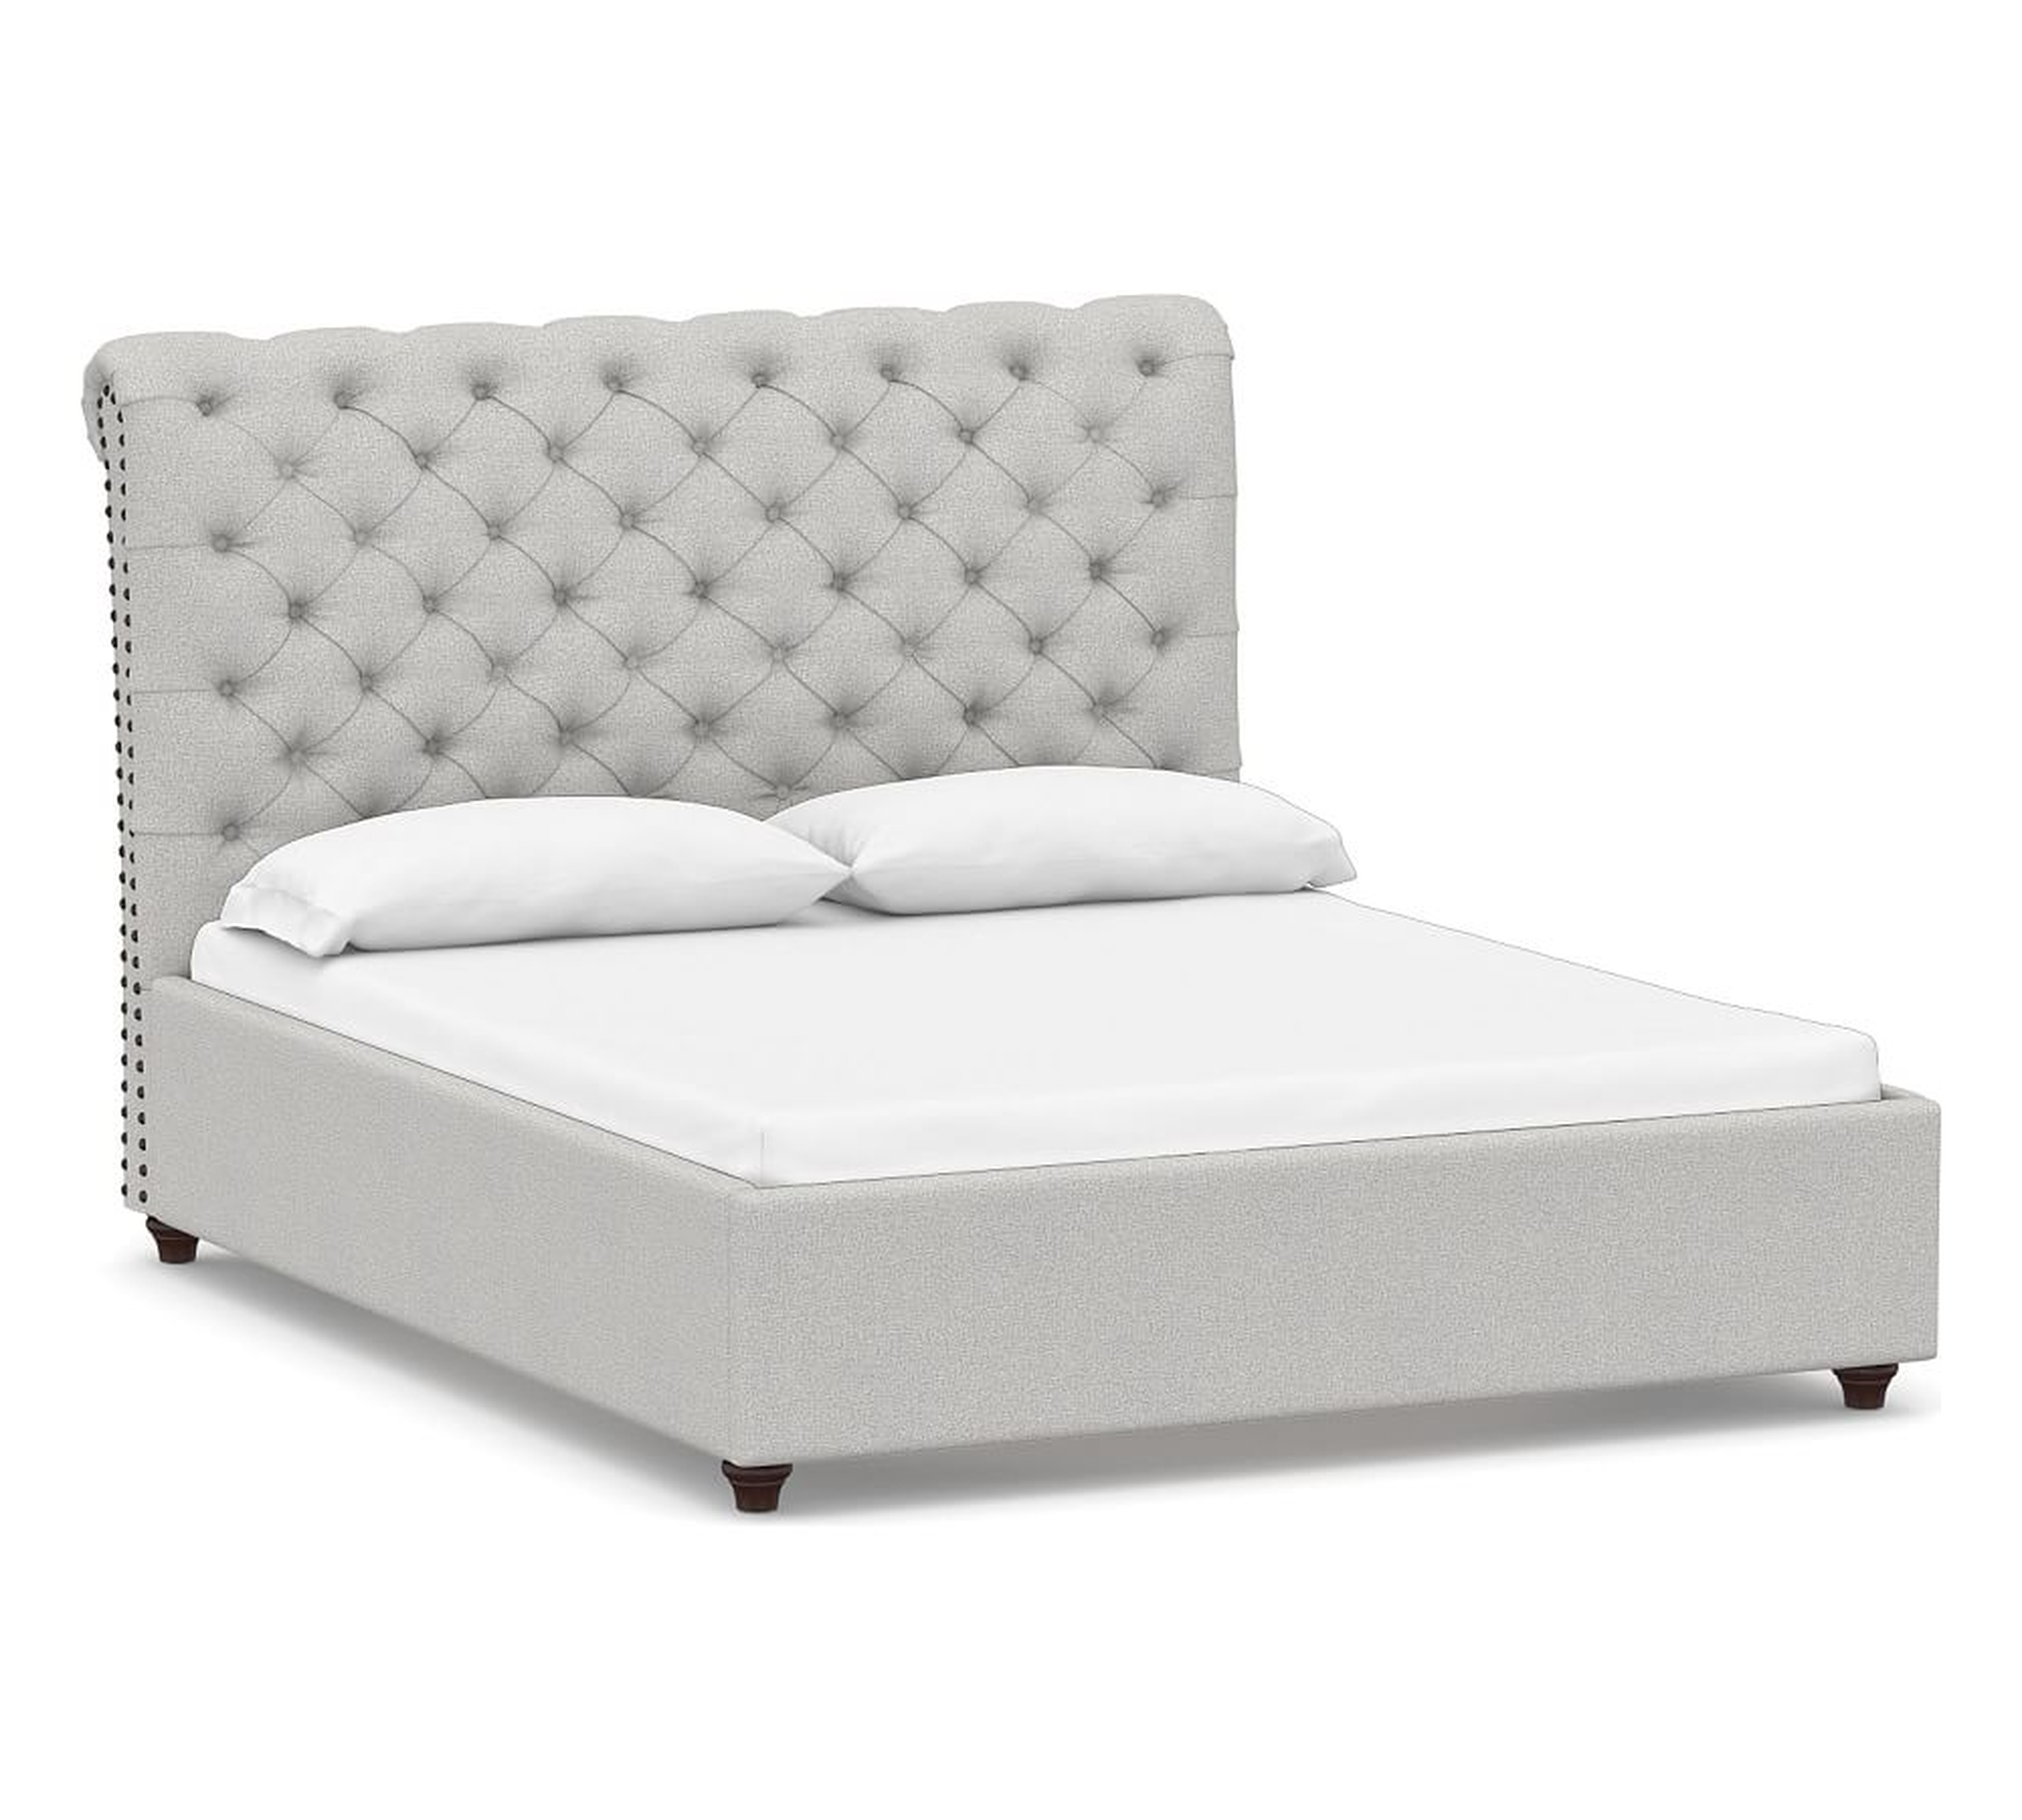 Chesterfield Tufted Upholstered Bed, King, Park Weave Ash - Pottery Barn